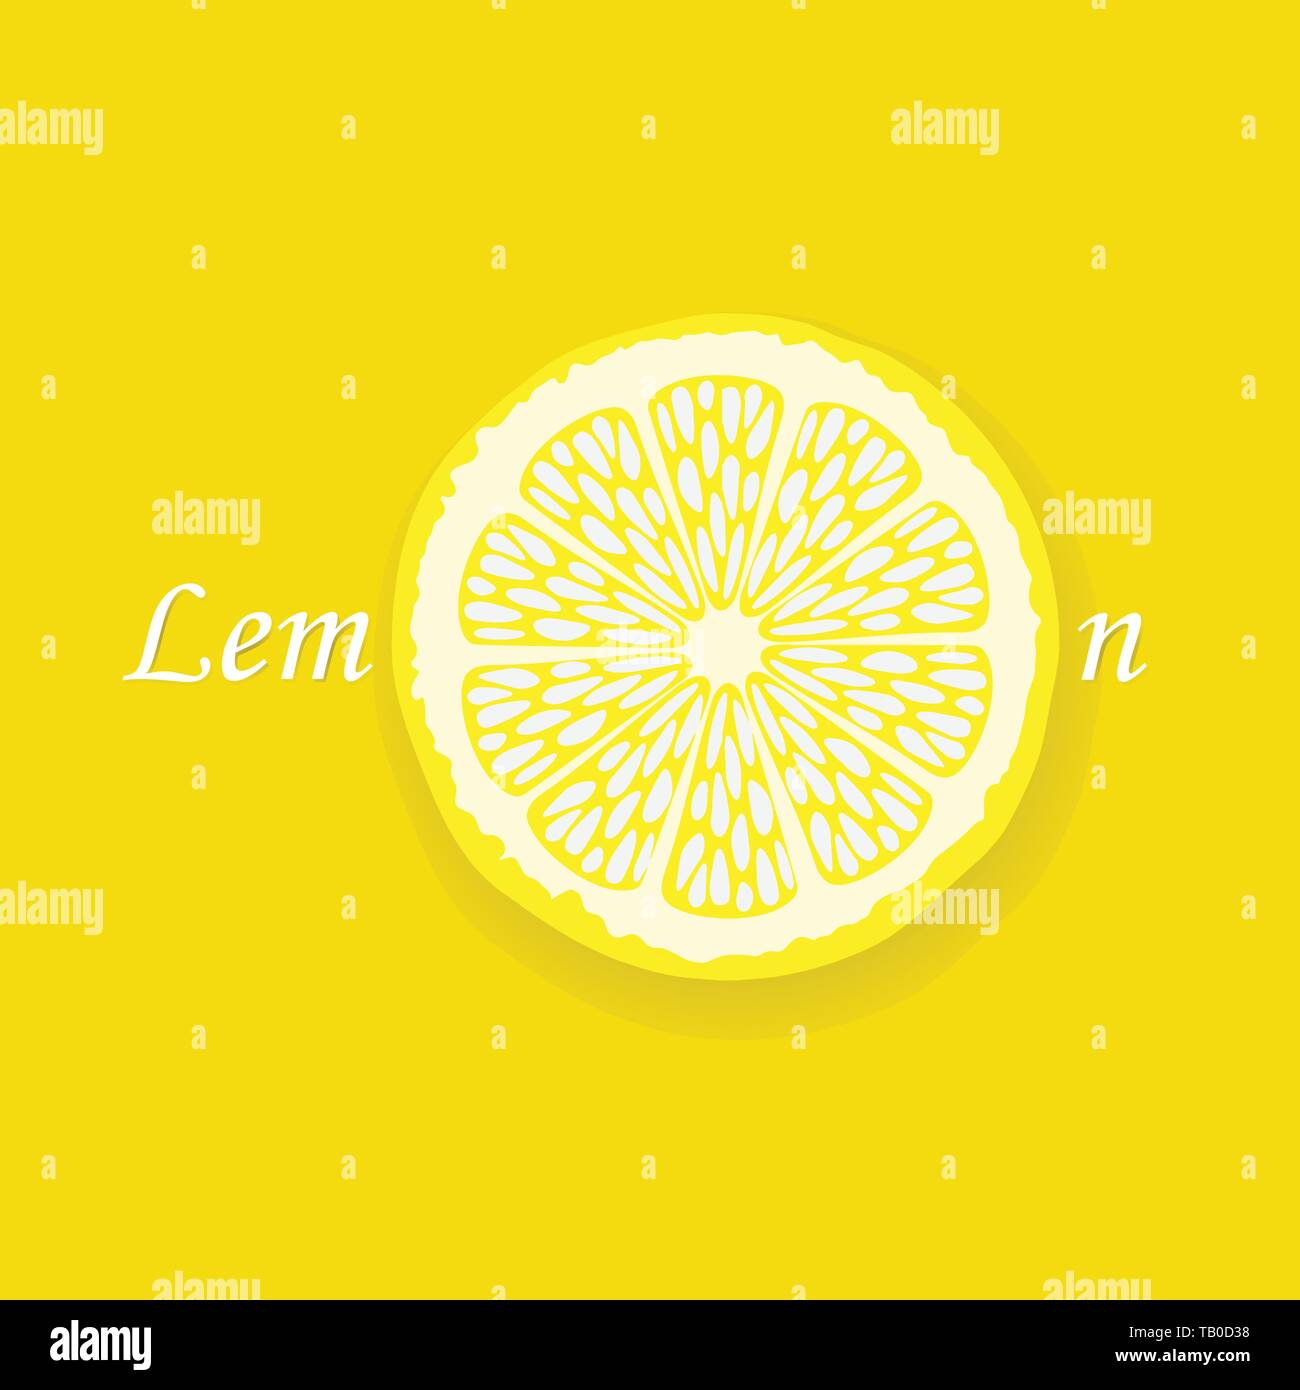 Lemon slice on yellow  background with text Stock Vector